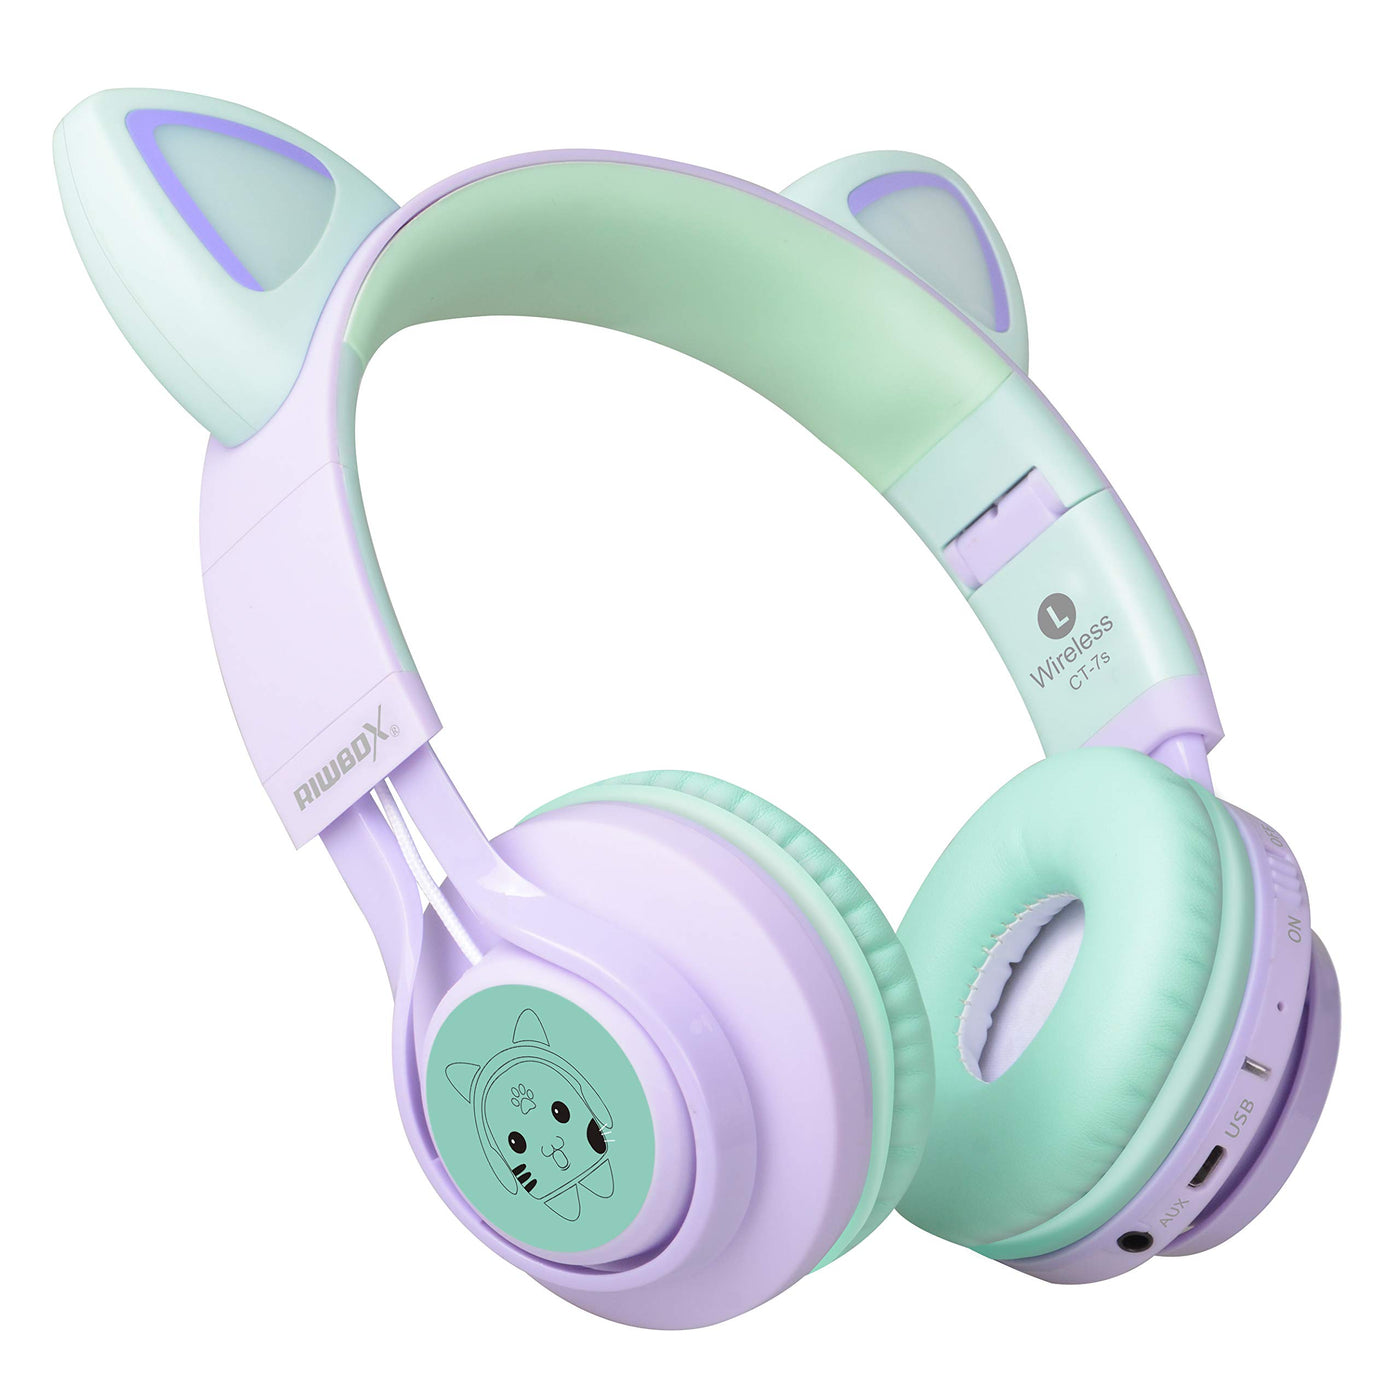 Riwbox CT-7S Cat Ear Bluetooth Headphones With LED For Kids